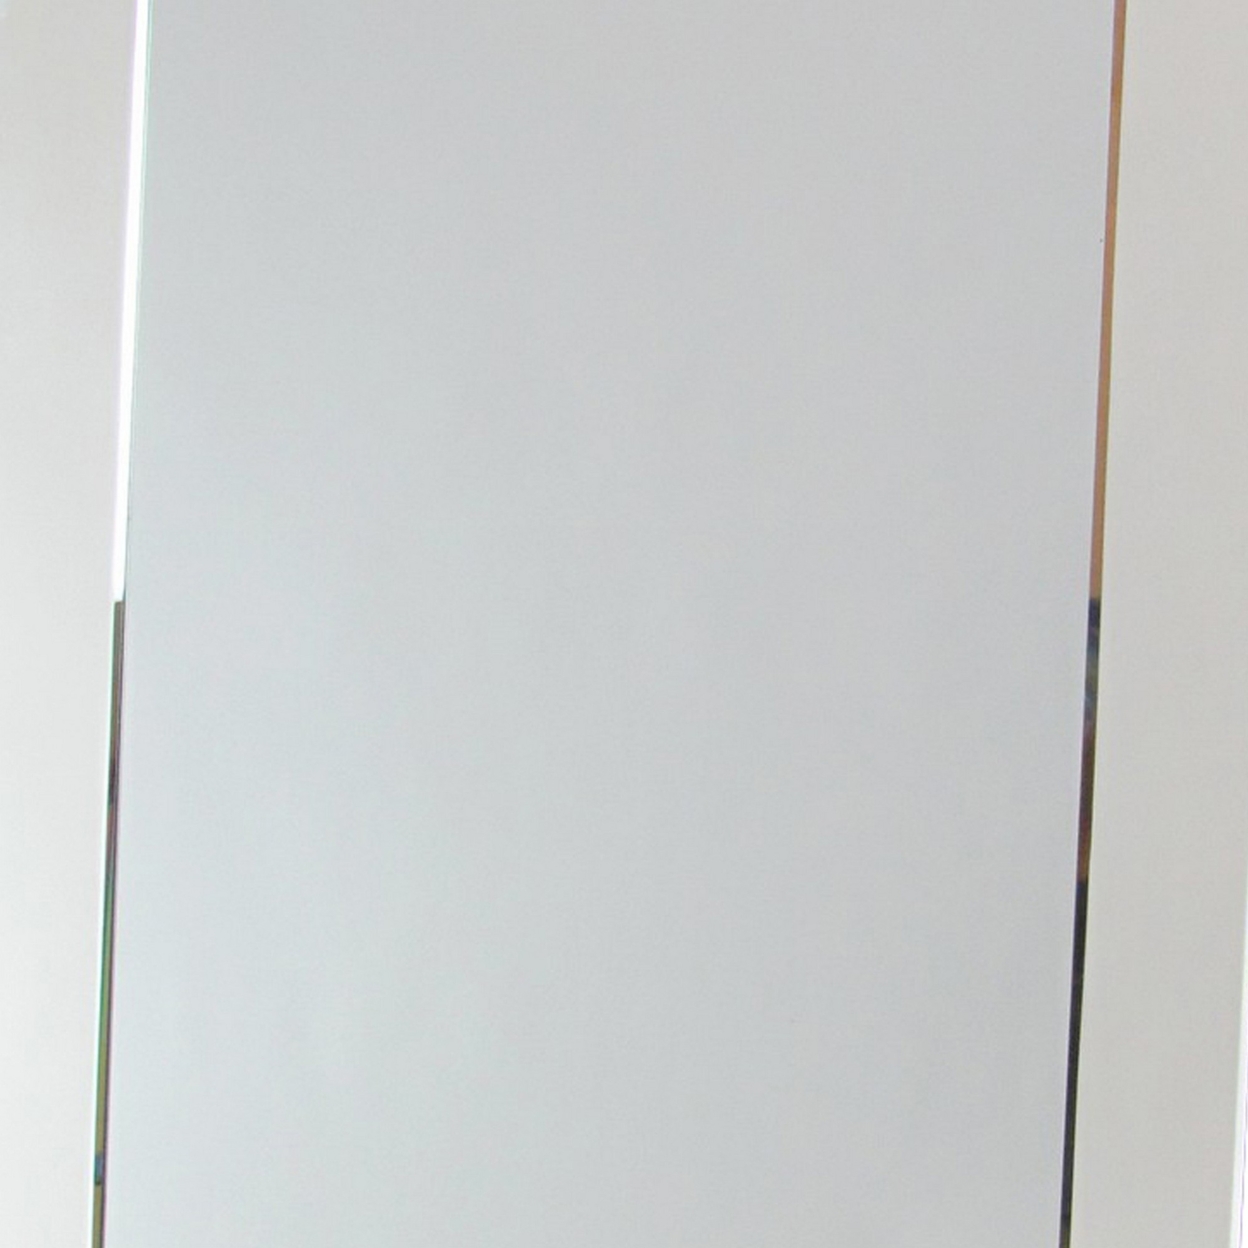 Rectangle Beveled Mirror With Mother Of Pearl Accent, Silver- Saltoro Sherpi